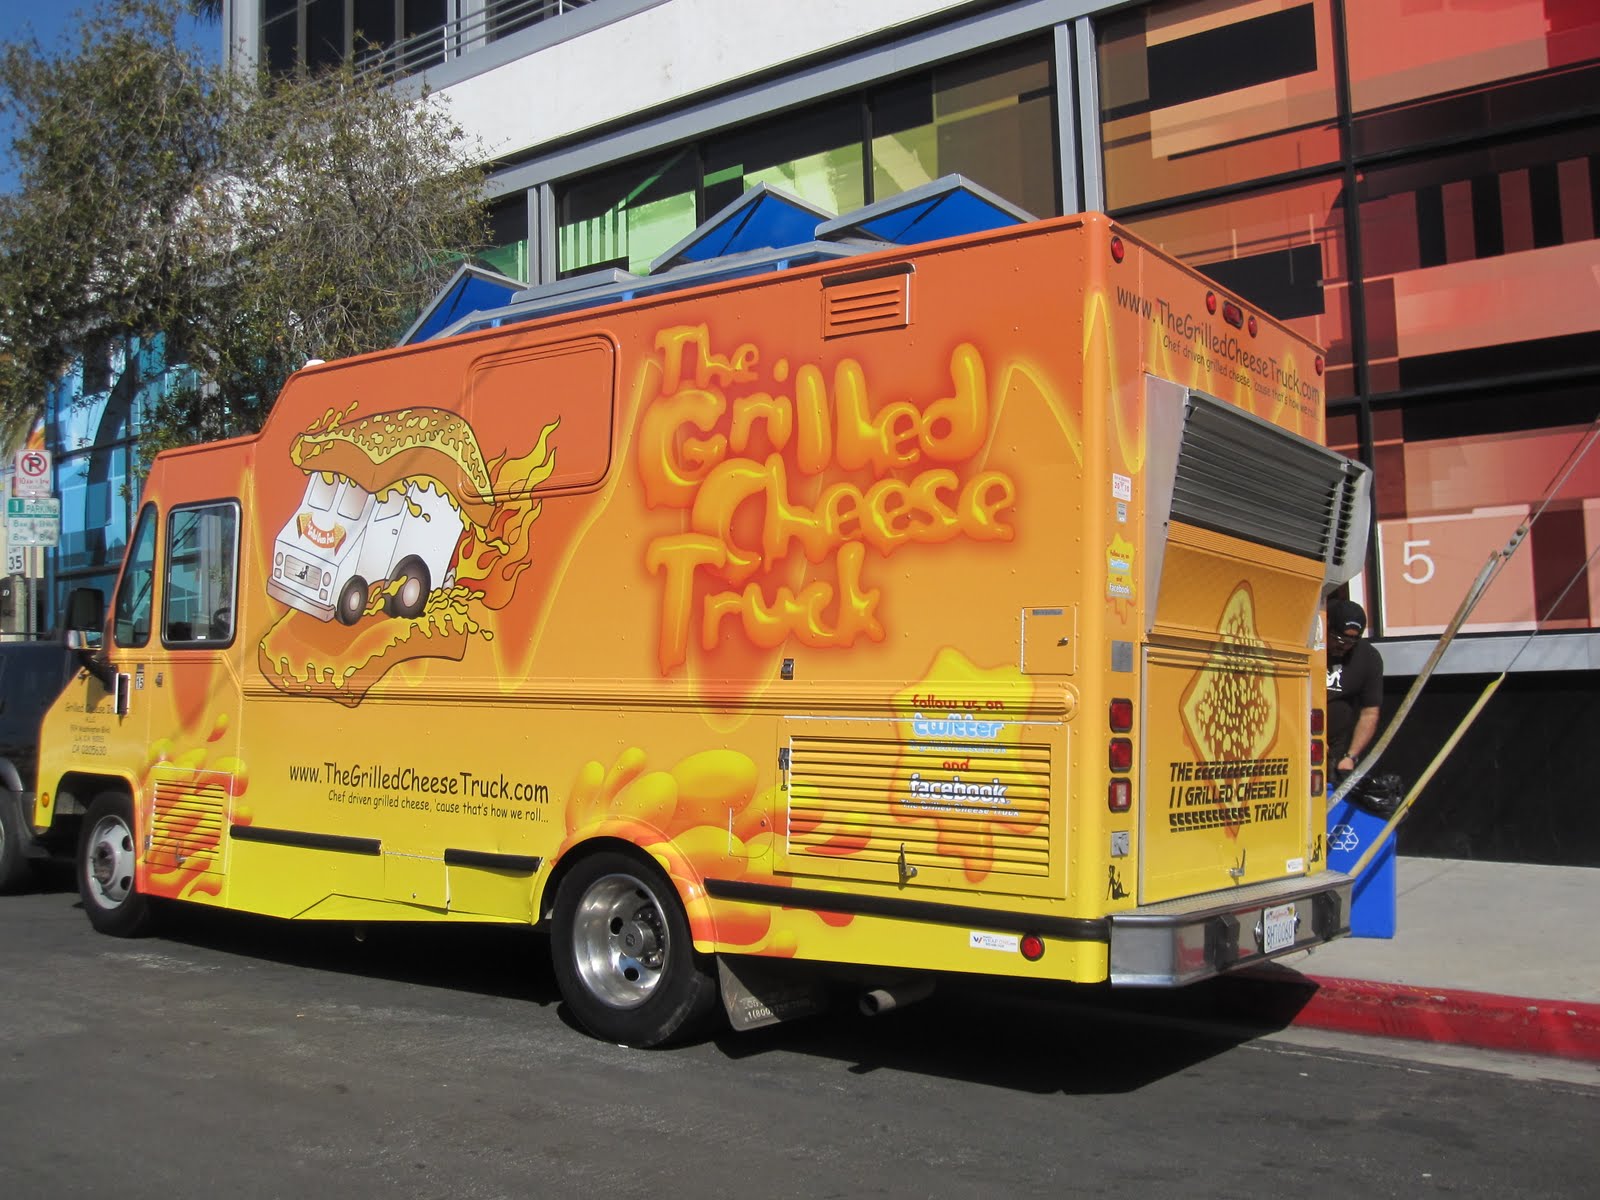 AwardWinning Original Grilled Cheese Truck's Second PreIPO Equity